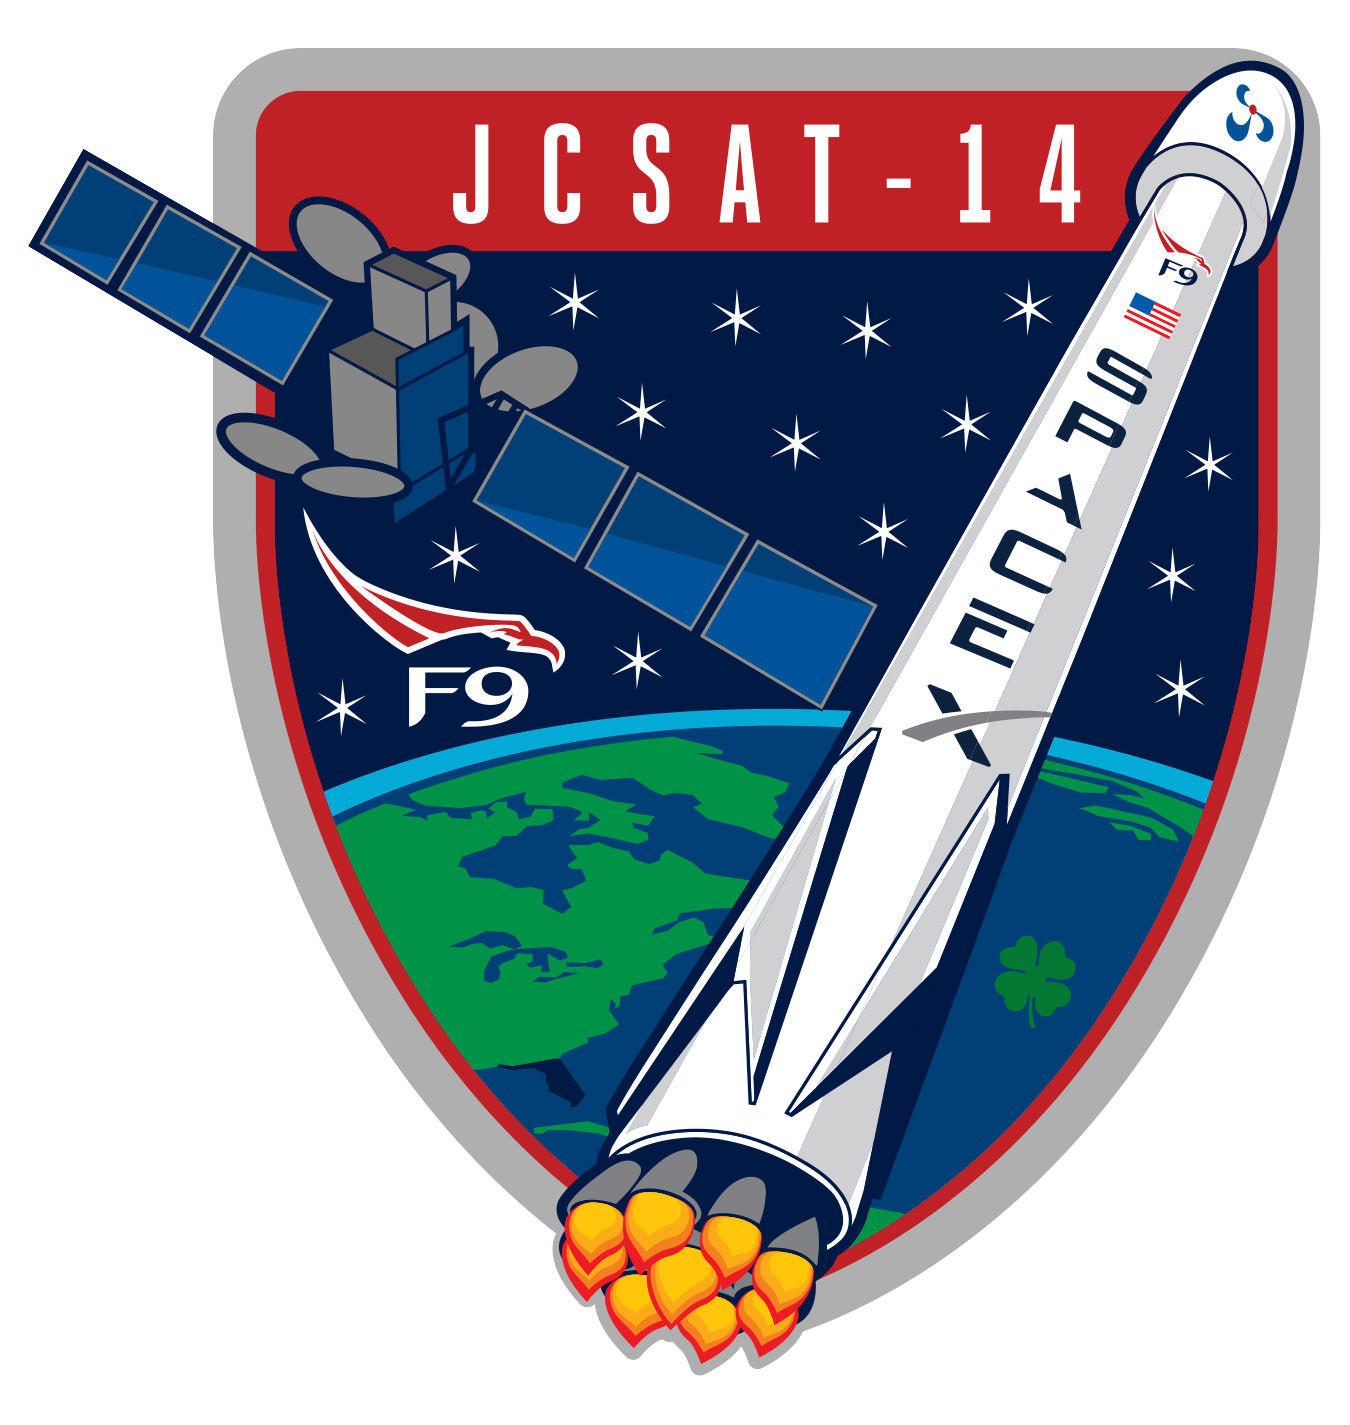 SpaceX JCSAT-14 mission patch. Credit: SpaceX 